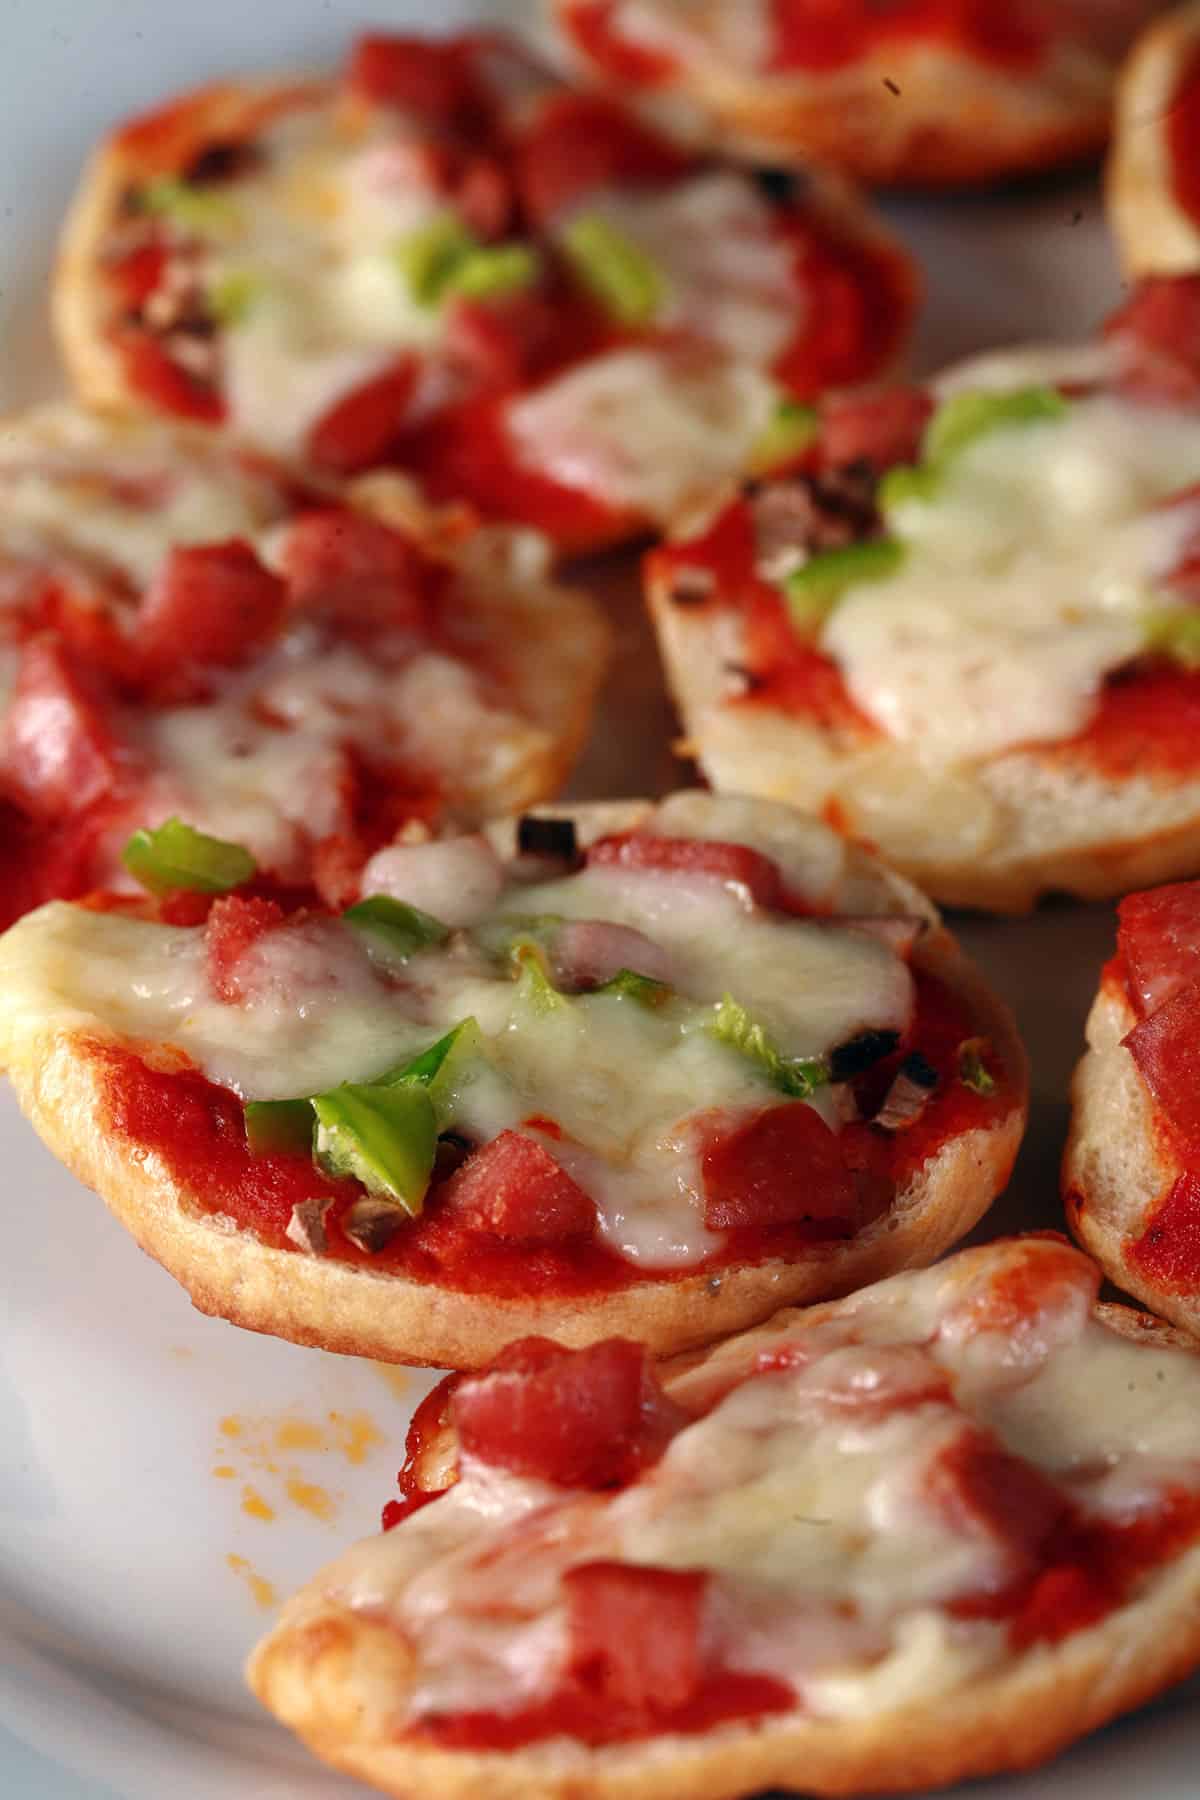 A plate of deluxe homemade bagel bites pizzas, with pepperoni, mushroom, and green peppers.